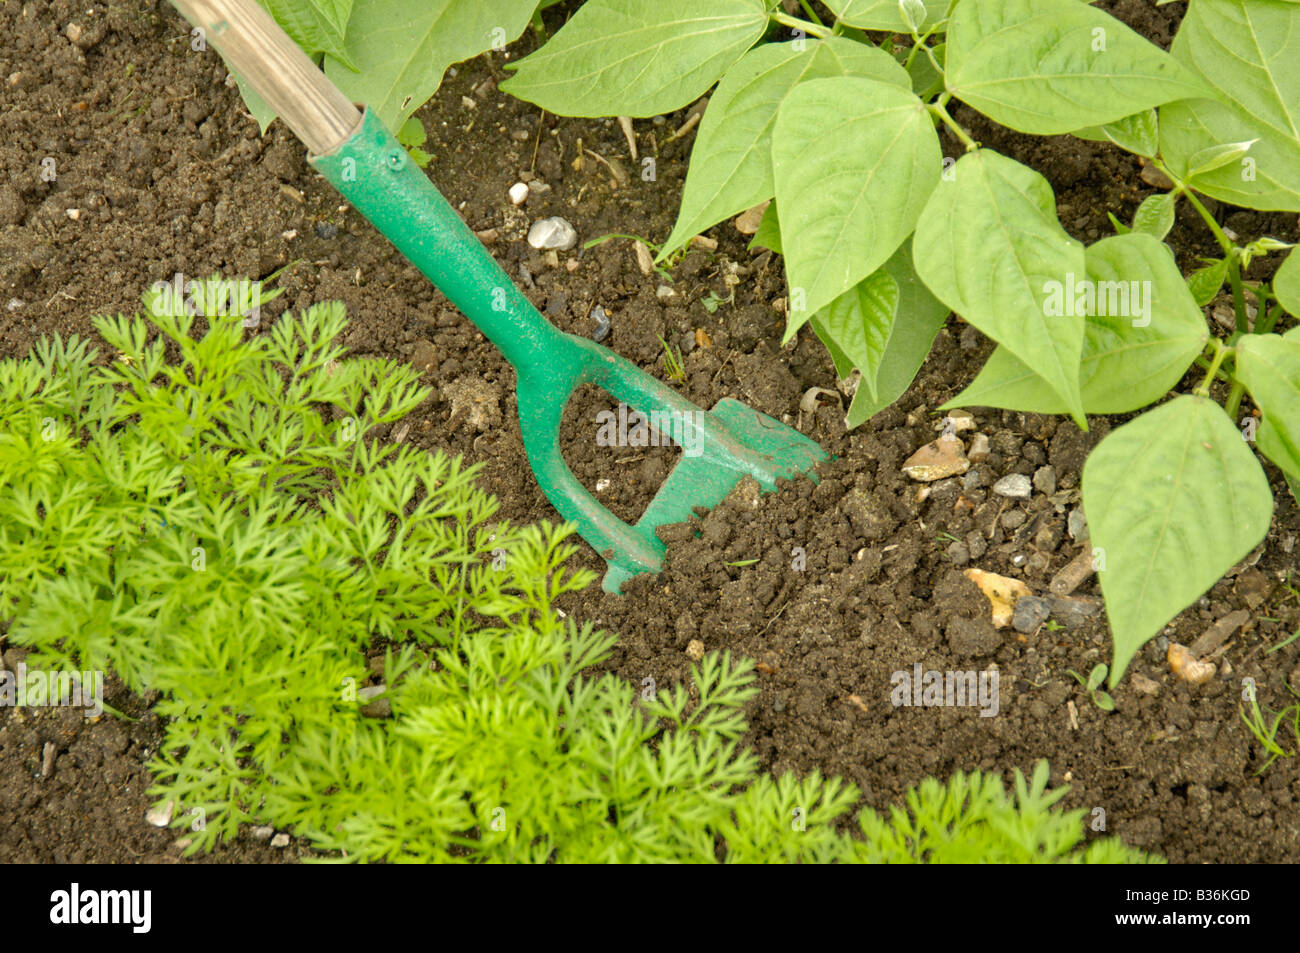 Using A Hand Hoe To Till Soil Between Carrots Nanco French Beans